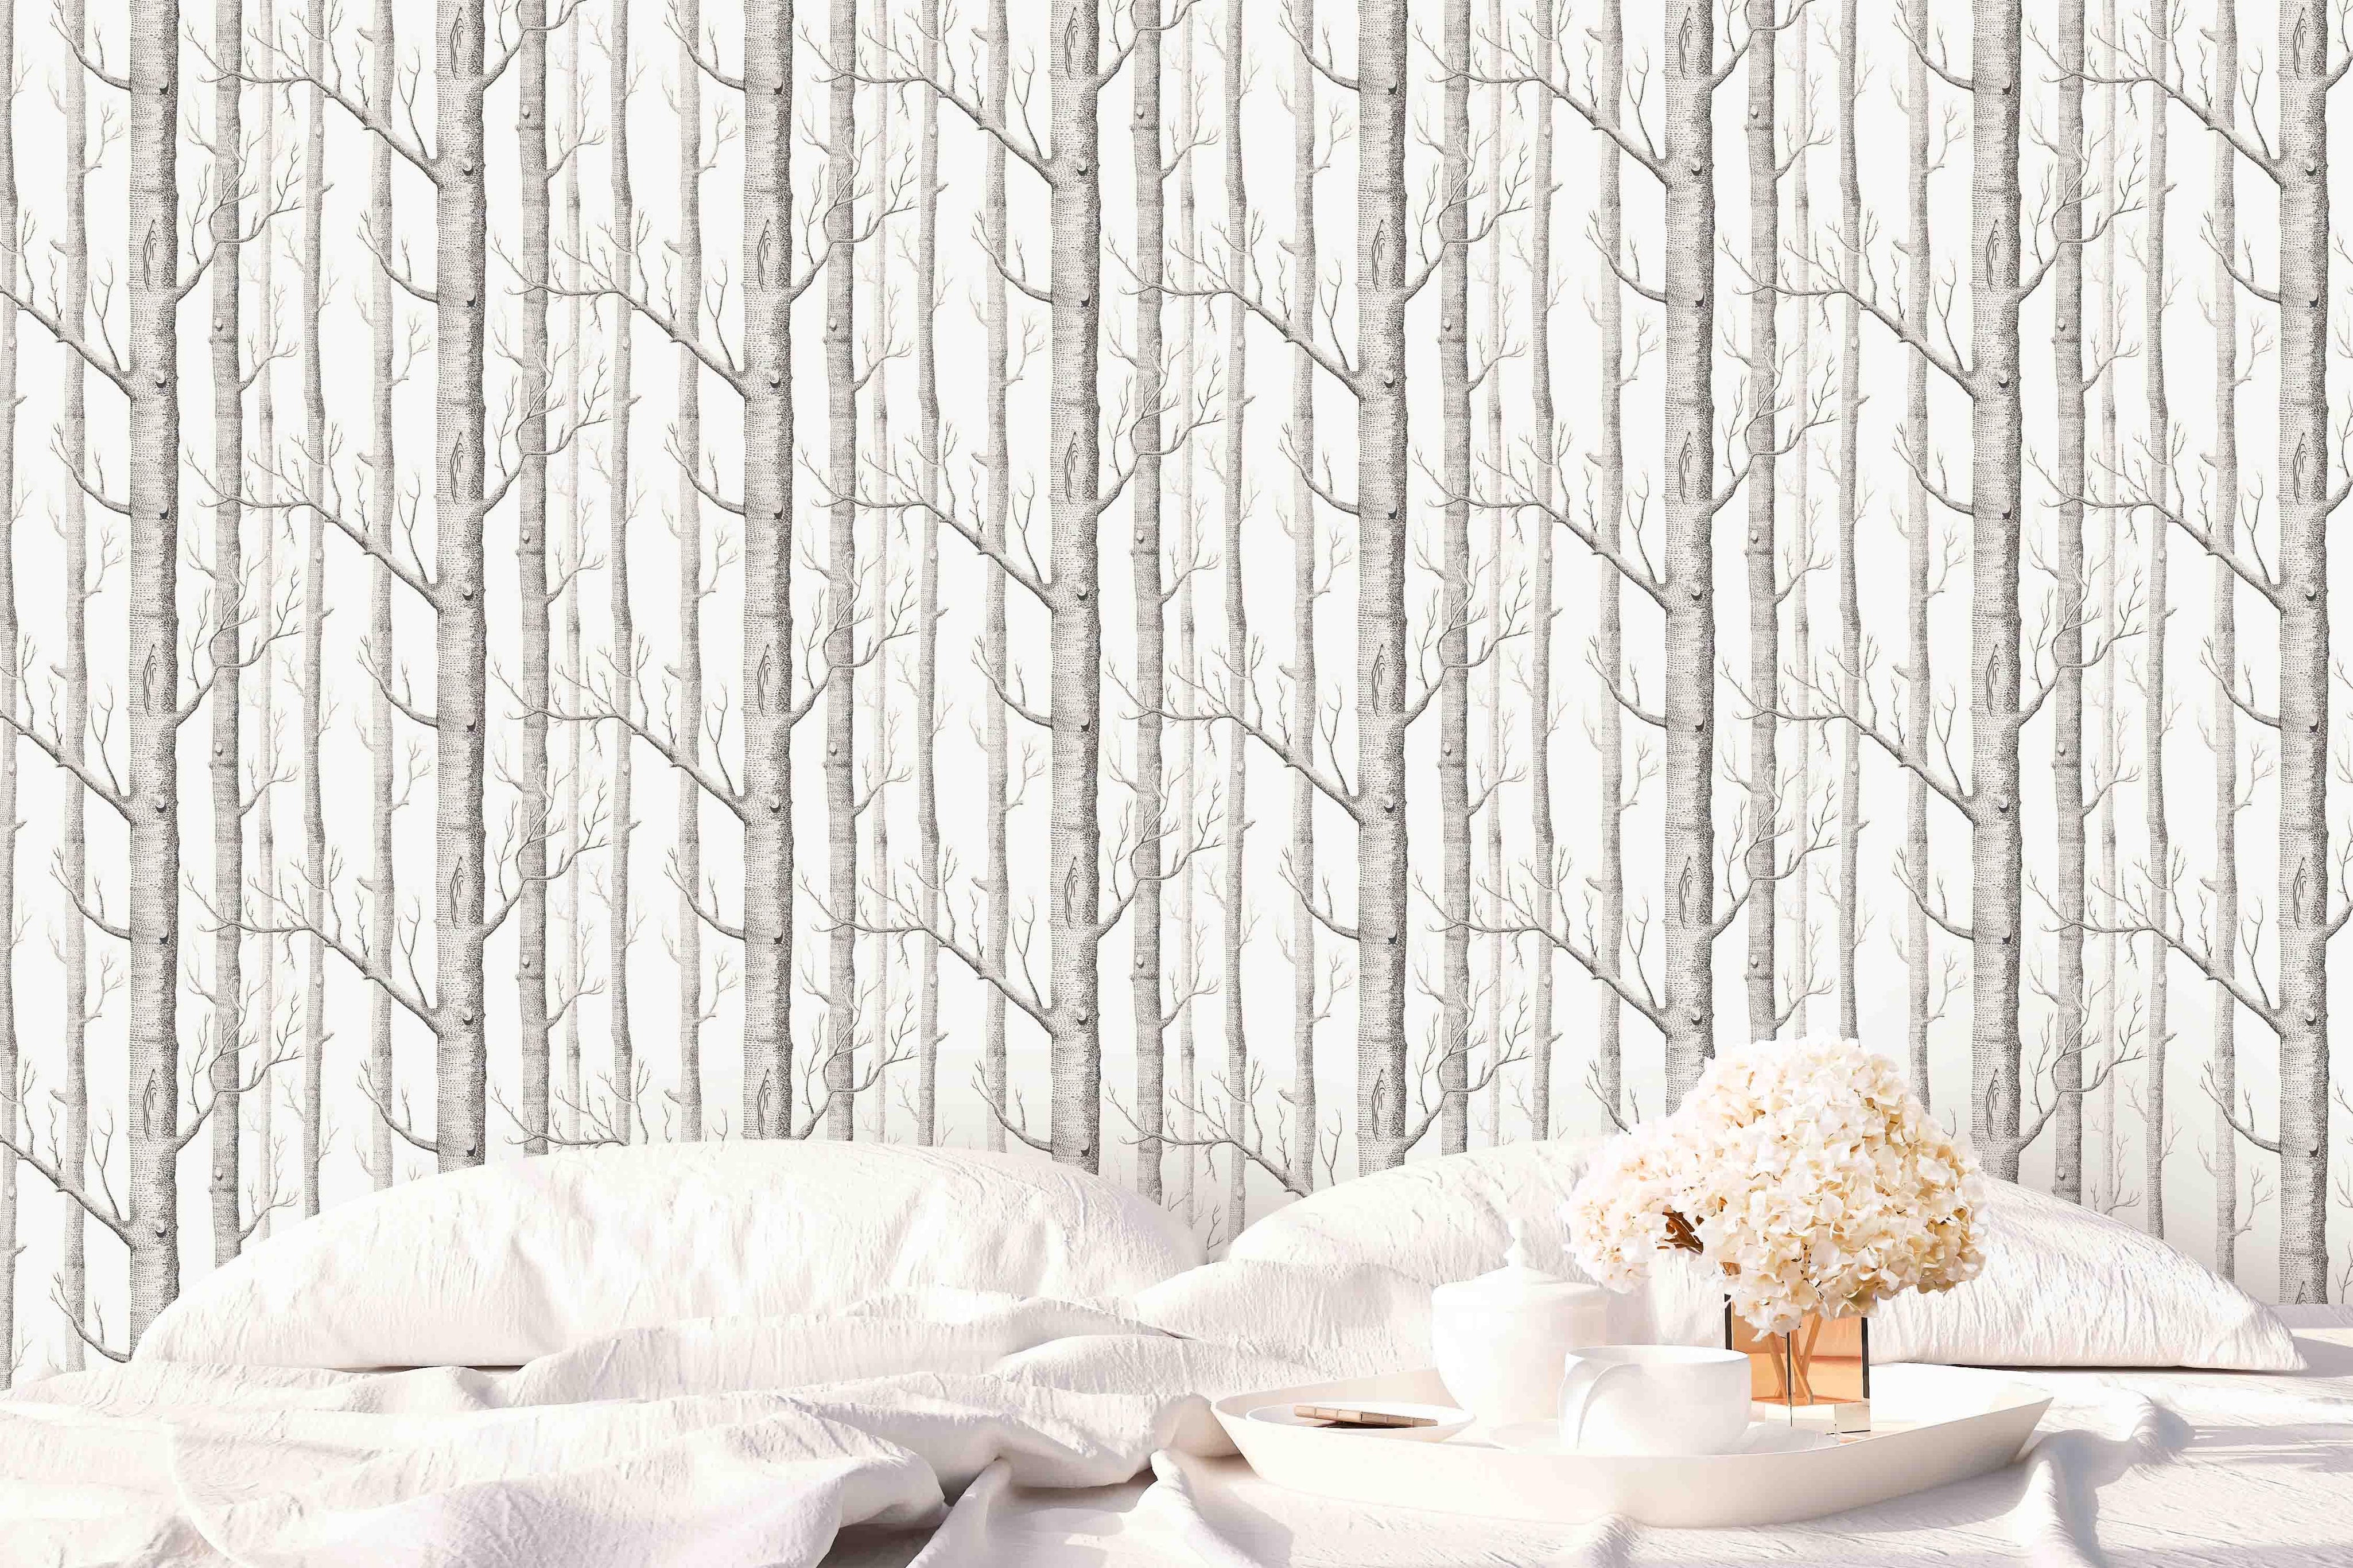 3D Simple Black White Forest Wall Mural Wallpaper 32- Jess Art Decoration